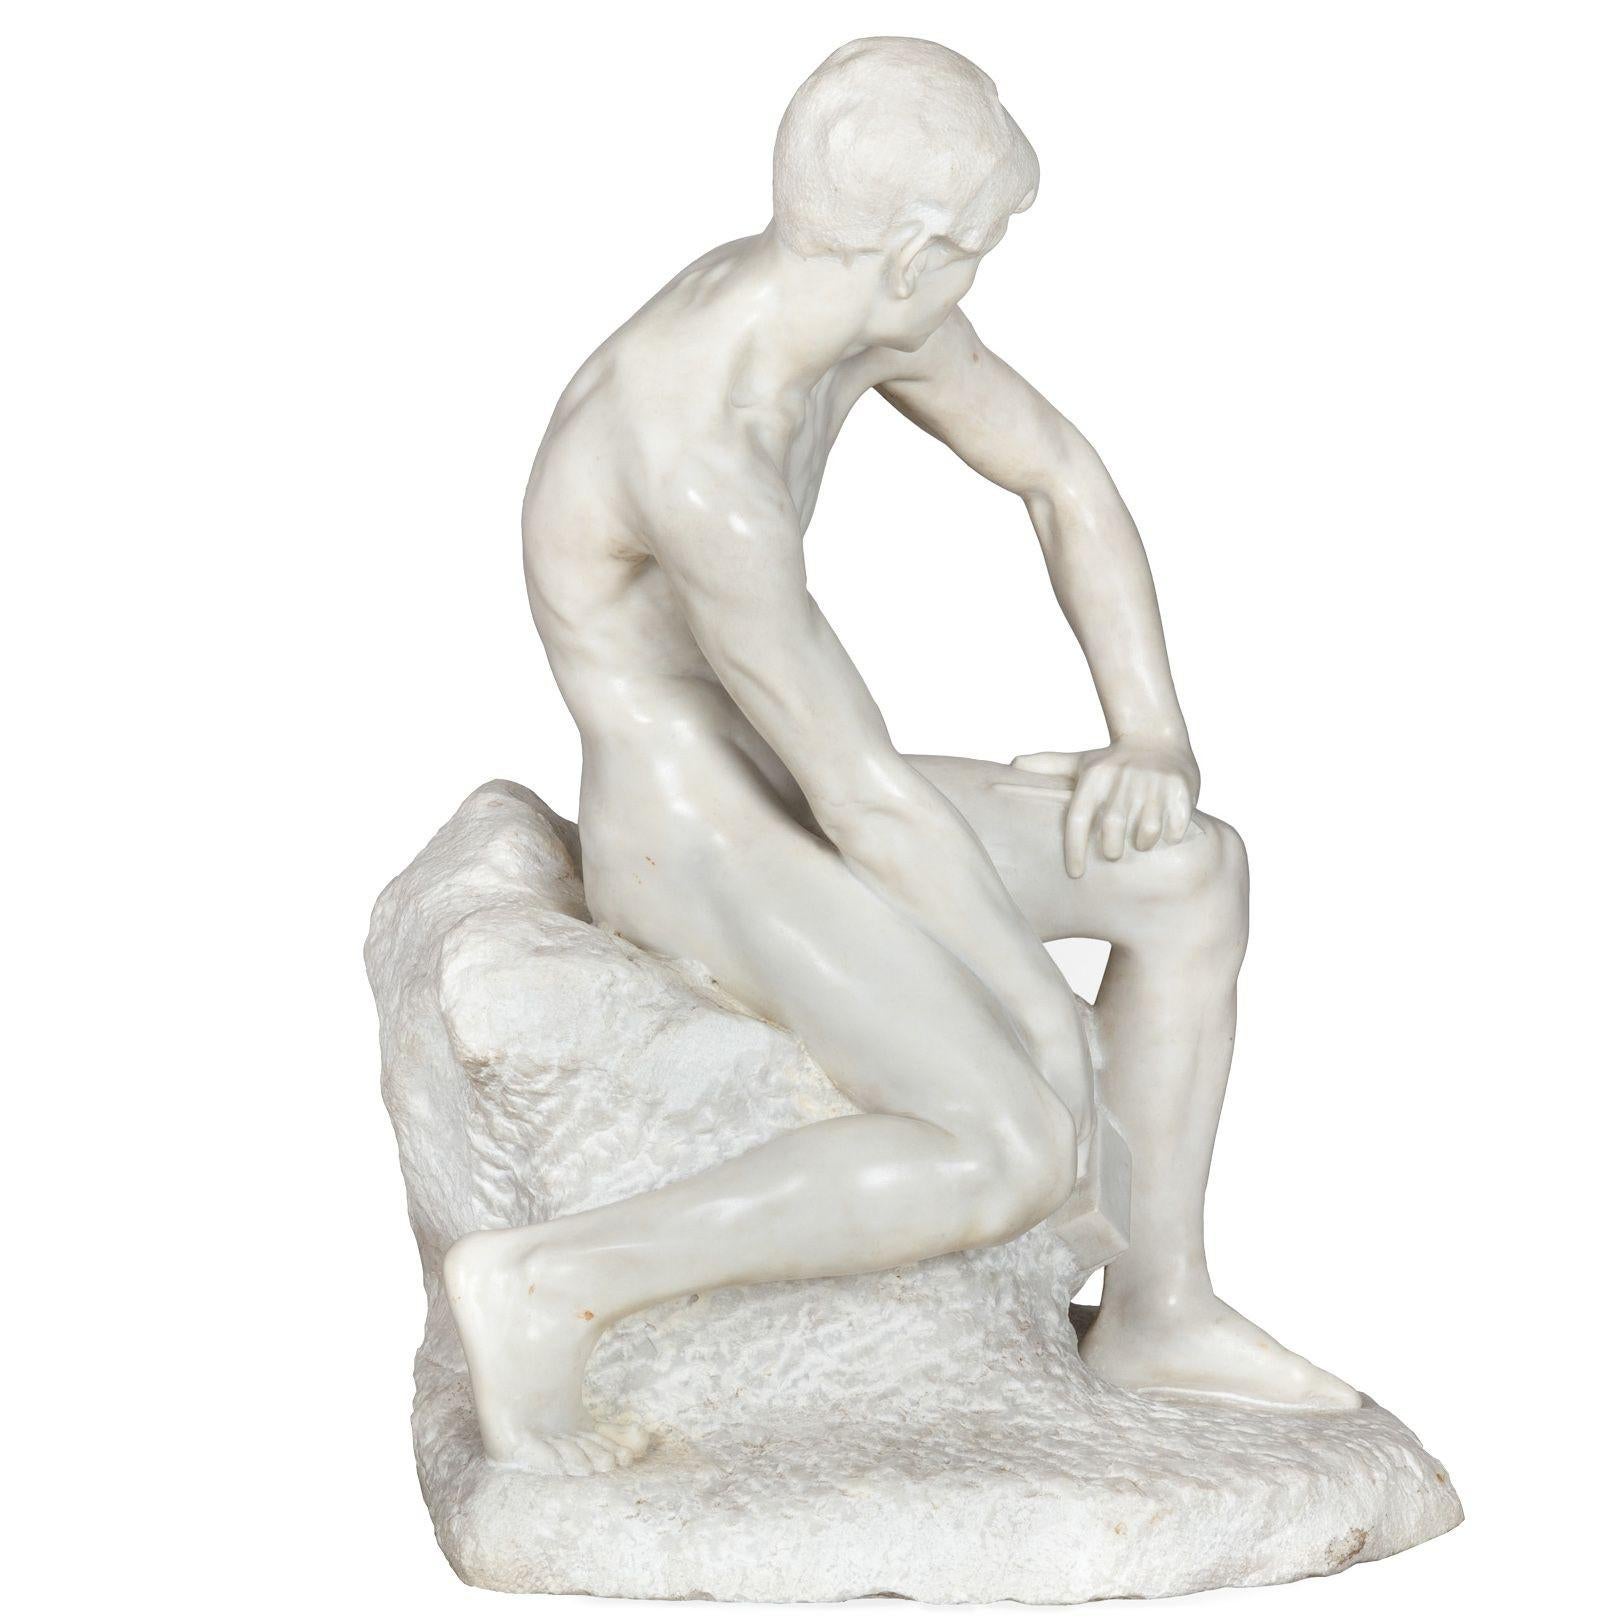 WORKSHOP OF BARSANTI
Italy, 20th century

A Young Stone Carver

Carrara marble  signed to the back by Barsanti, Pietrasanta  circa first half of the 20th century

Item # 304QGS30Q 

A powerful study of a young stone-carver, he rests against the